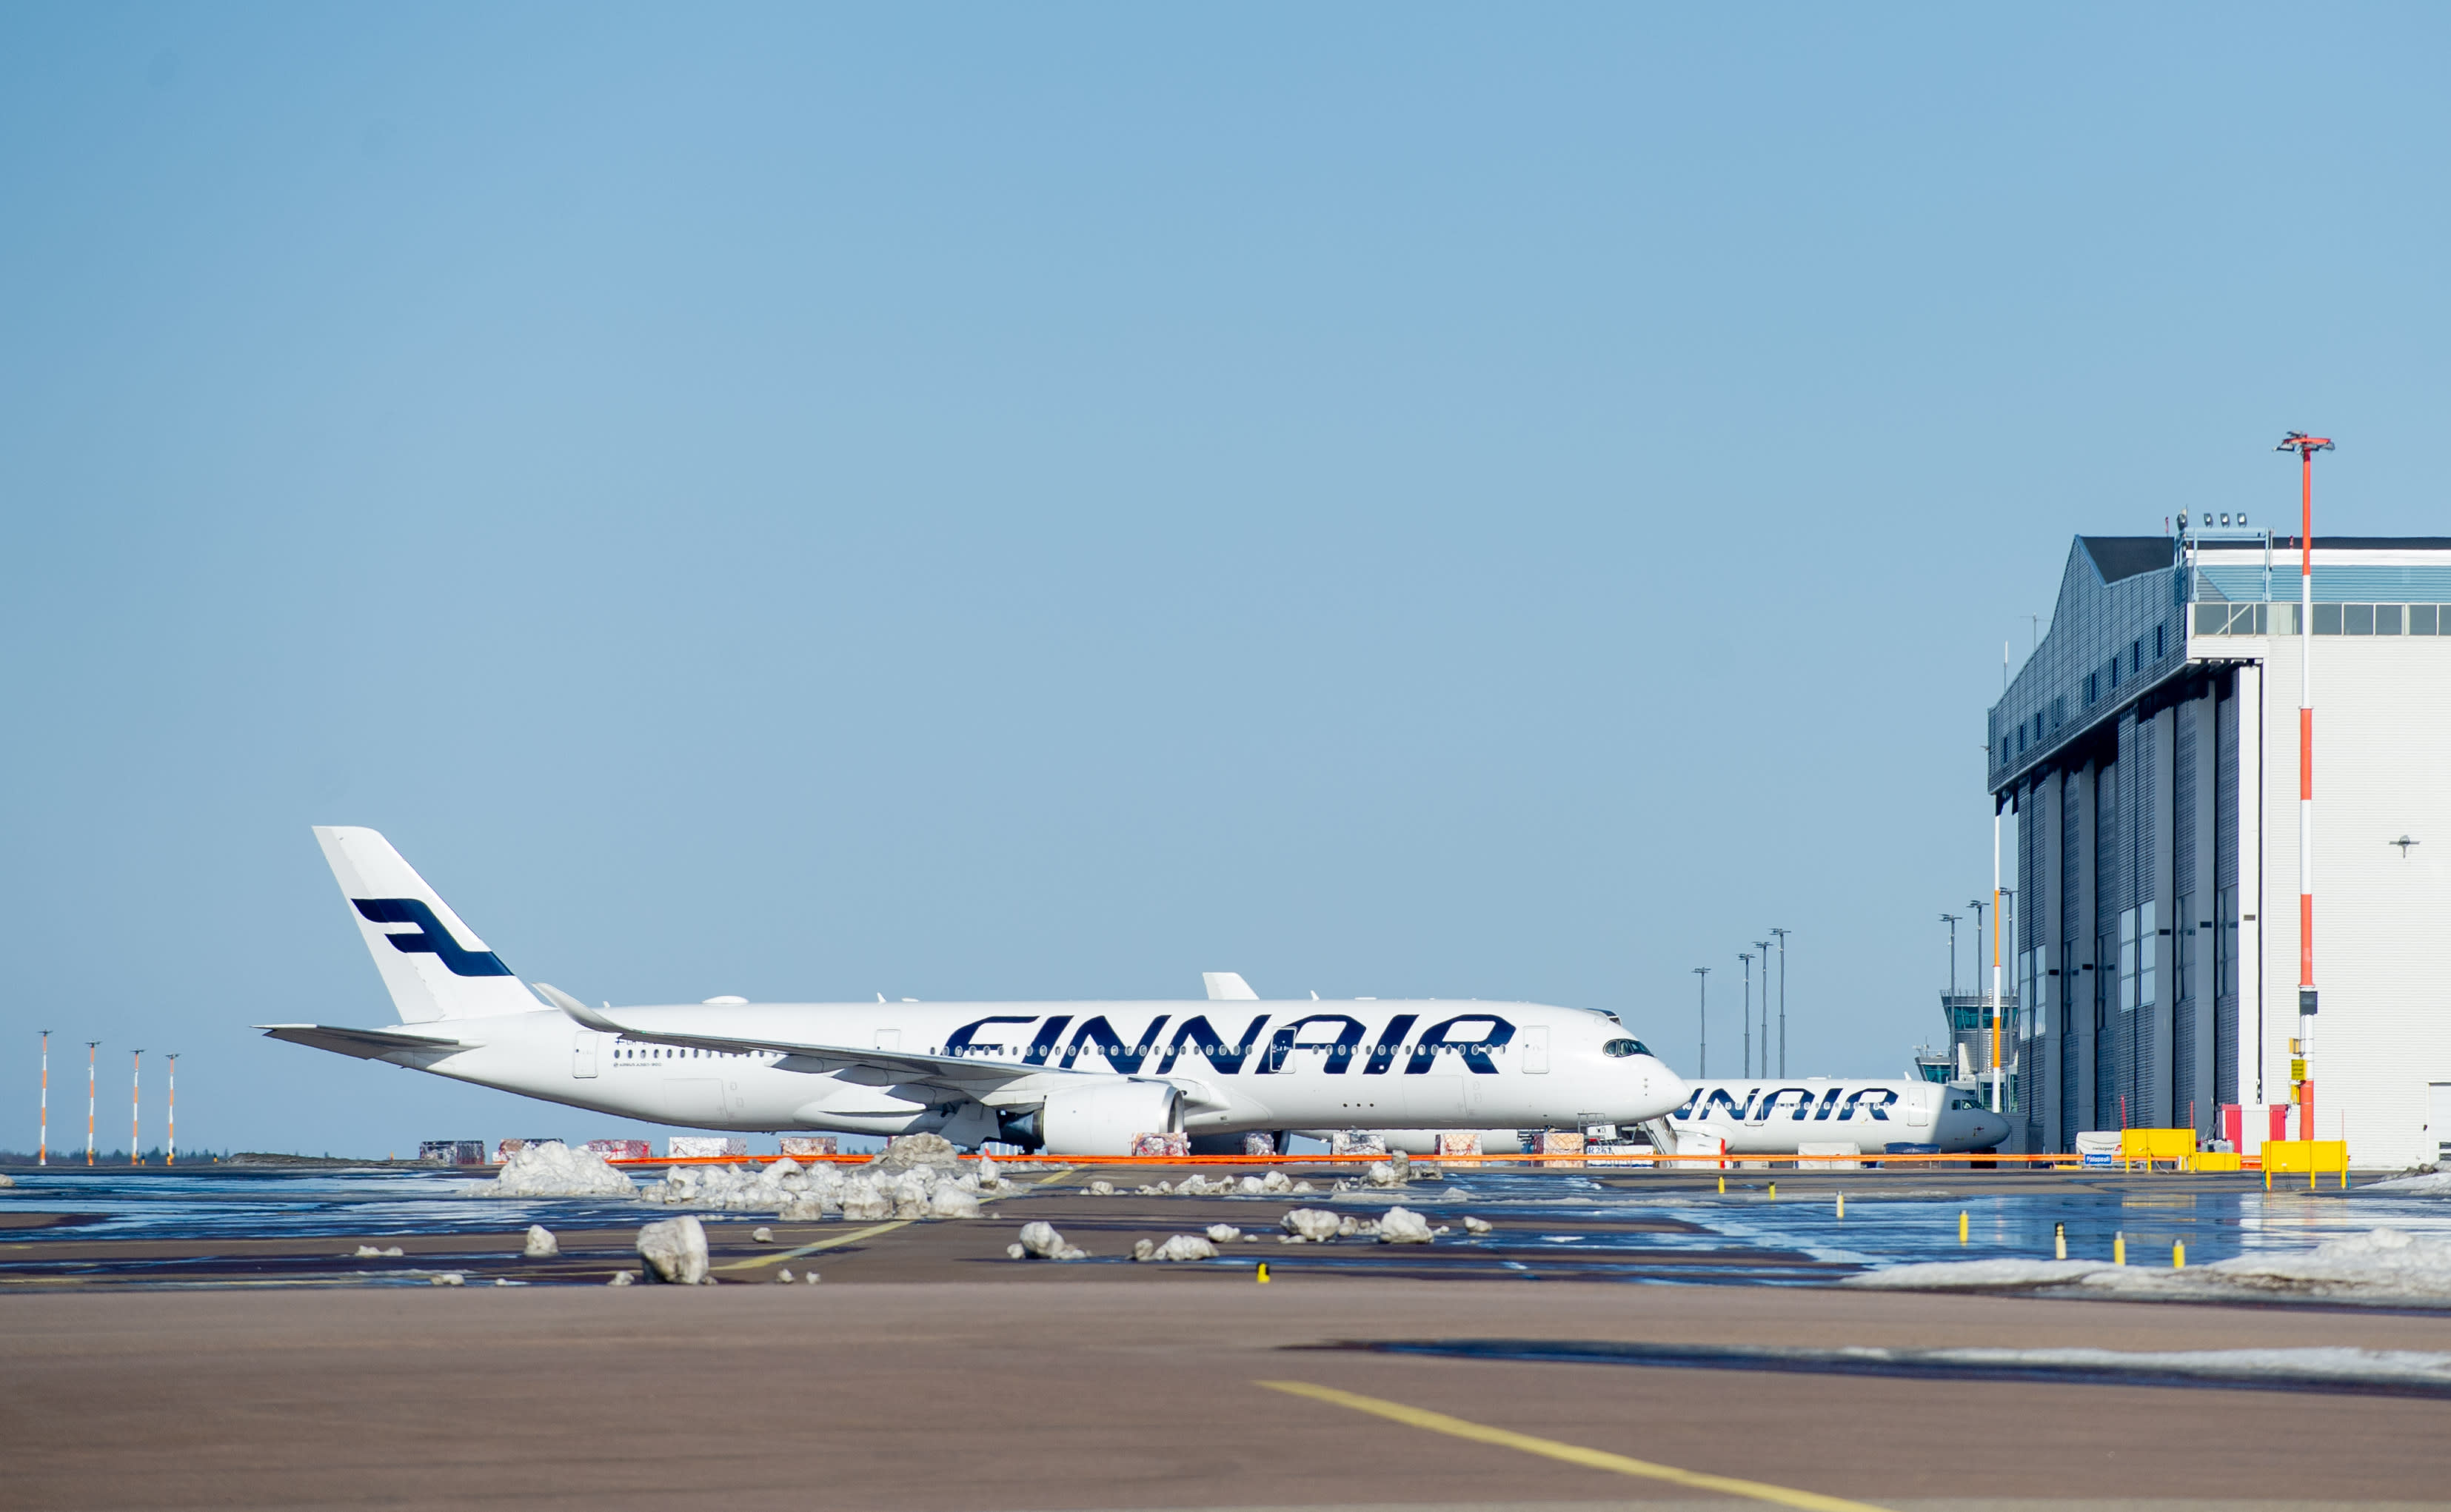 Finnair restricts passengers to London Heathrow under threat of legal action